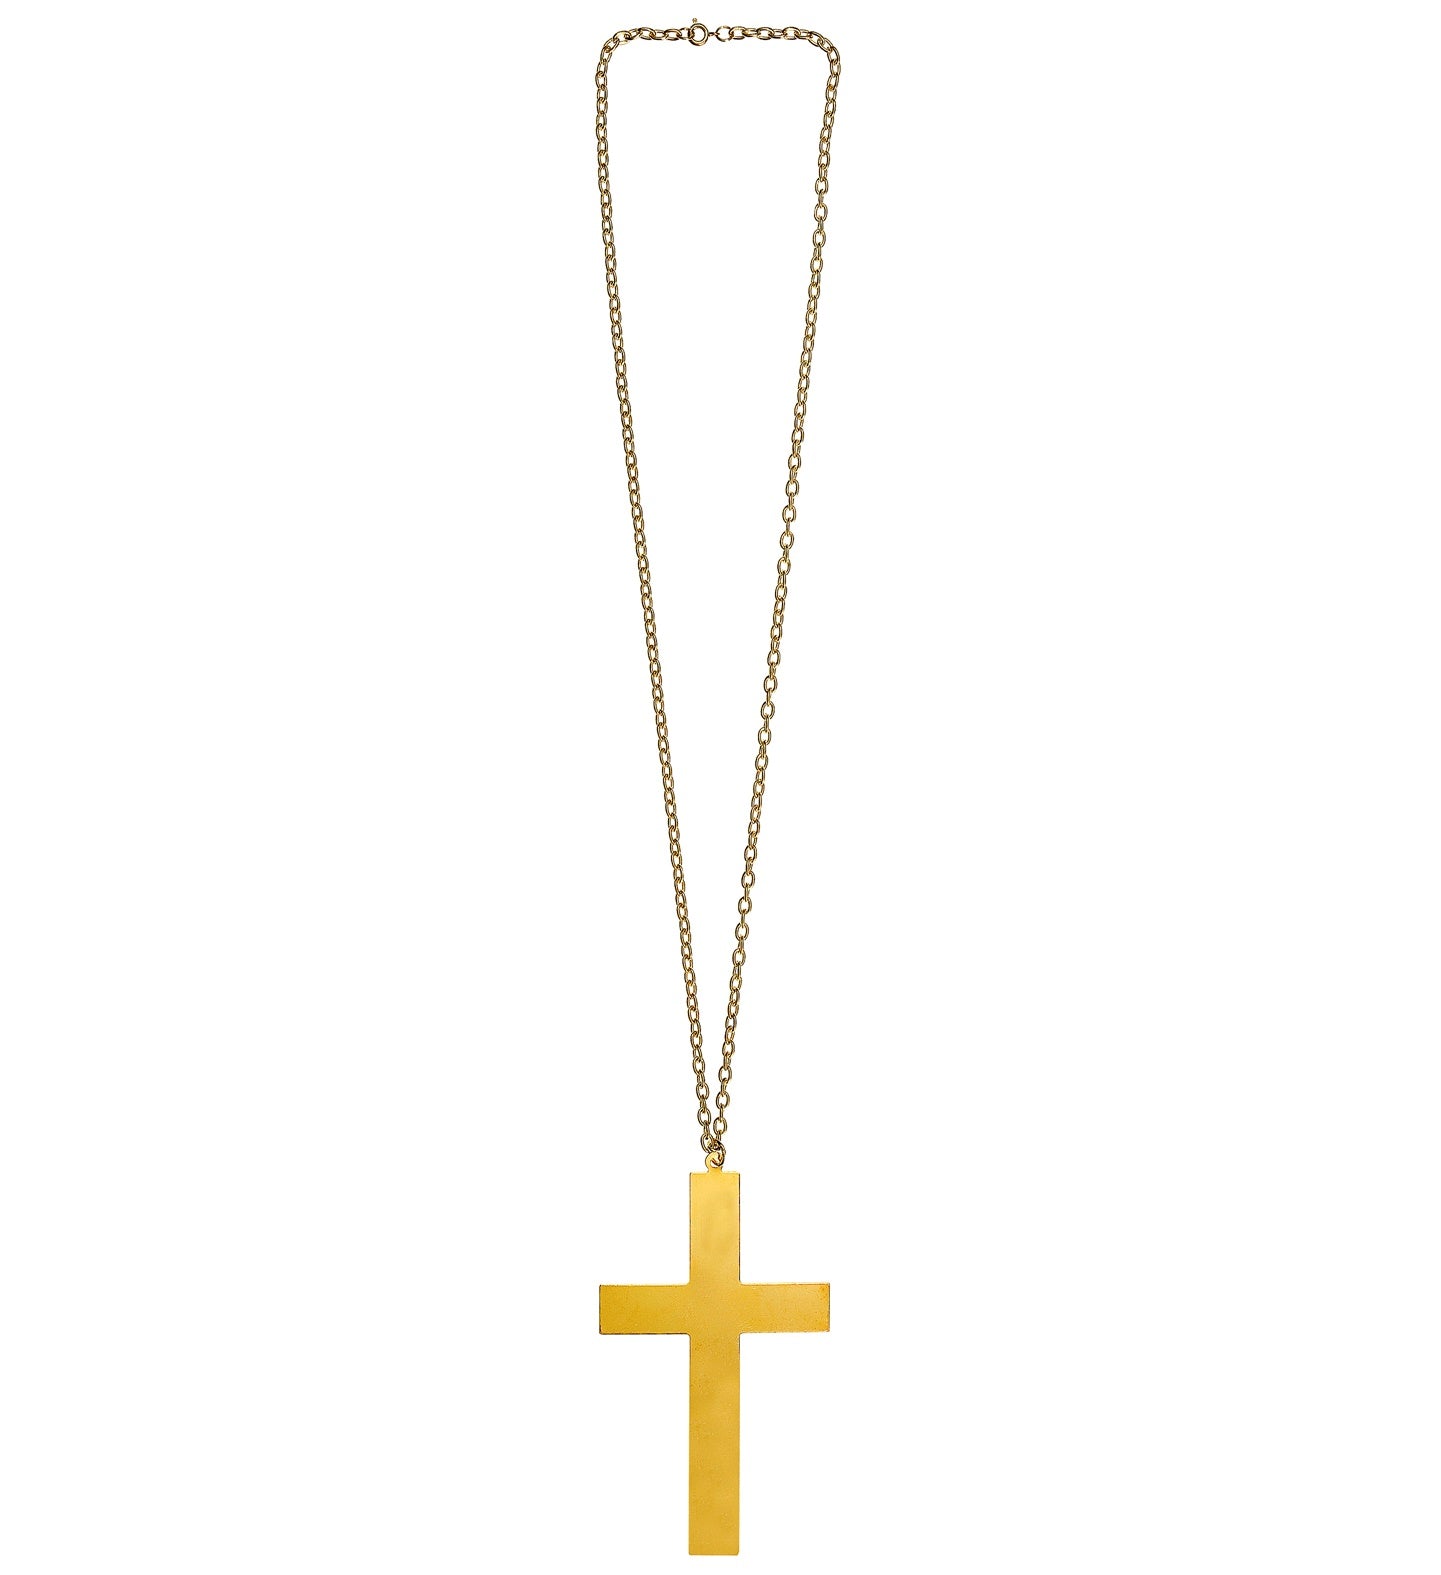 Gold Cross and Chain costume accessory